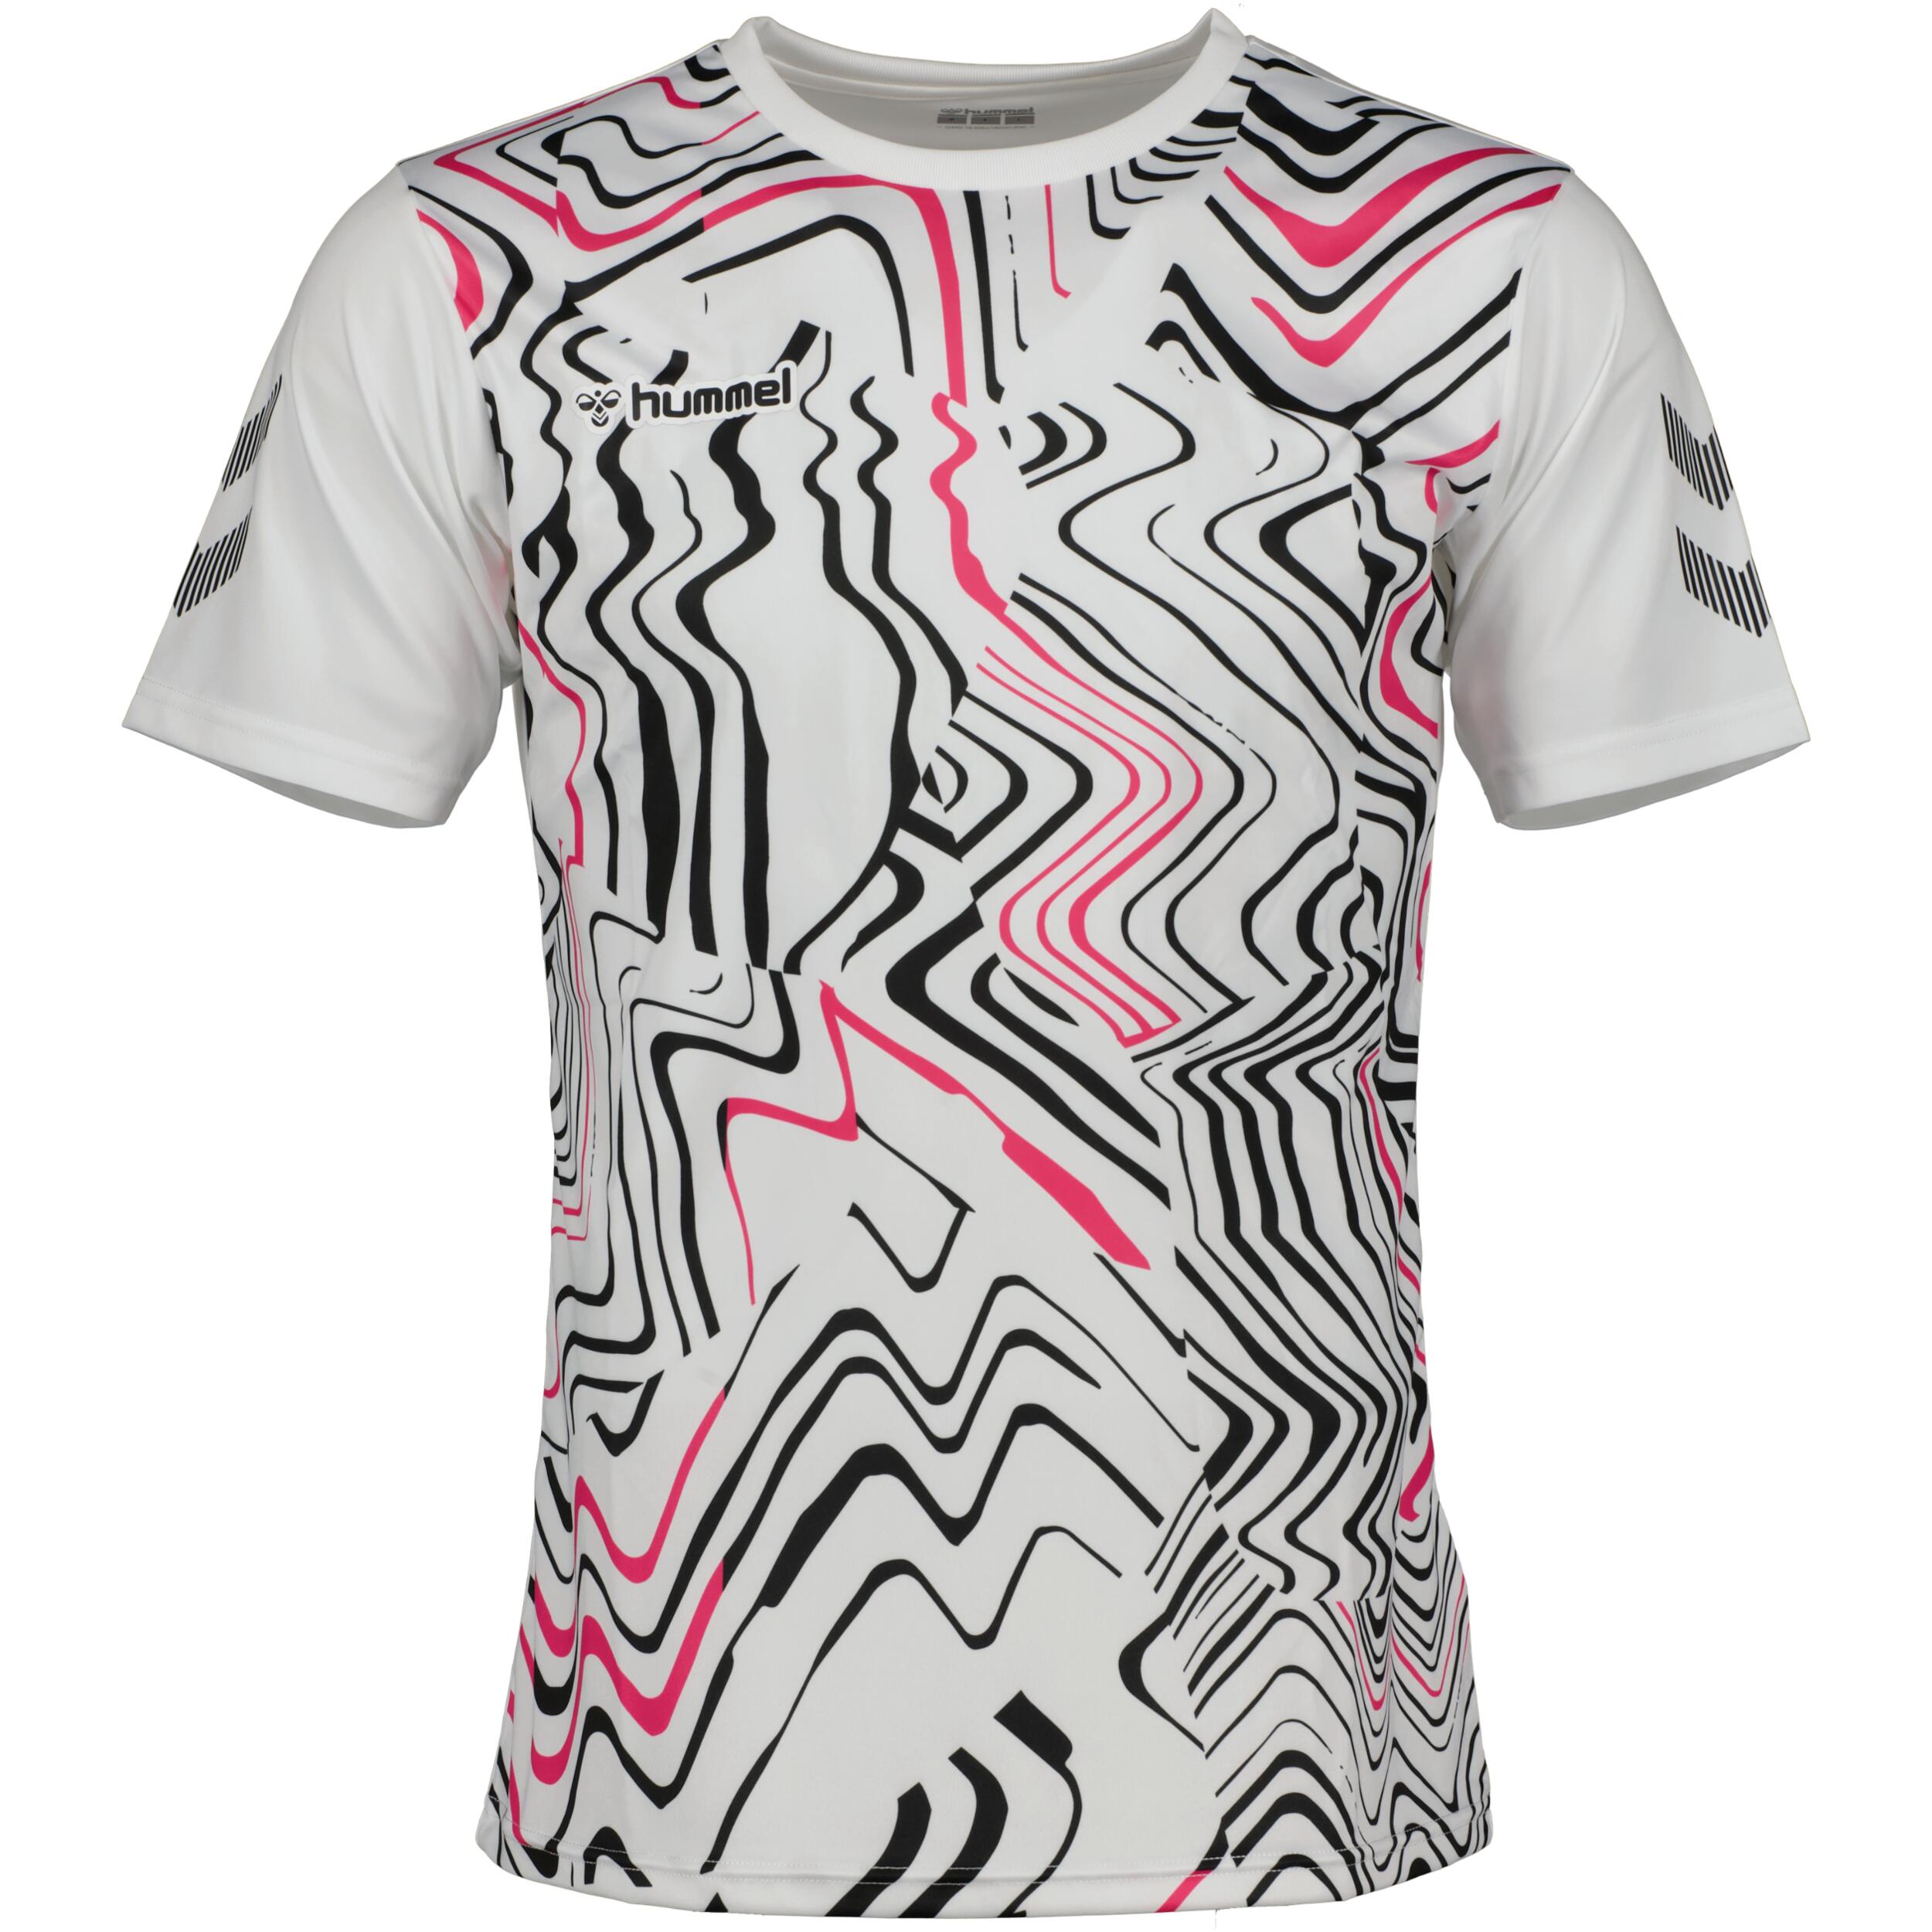 HUMMEL Hydro jersey for men, great for football, in white/black/pink